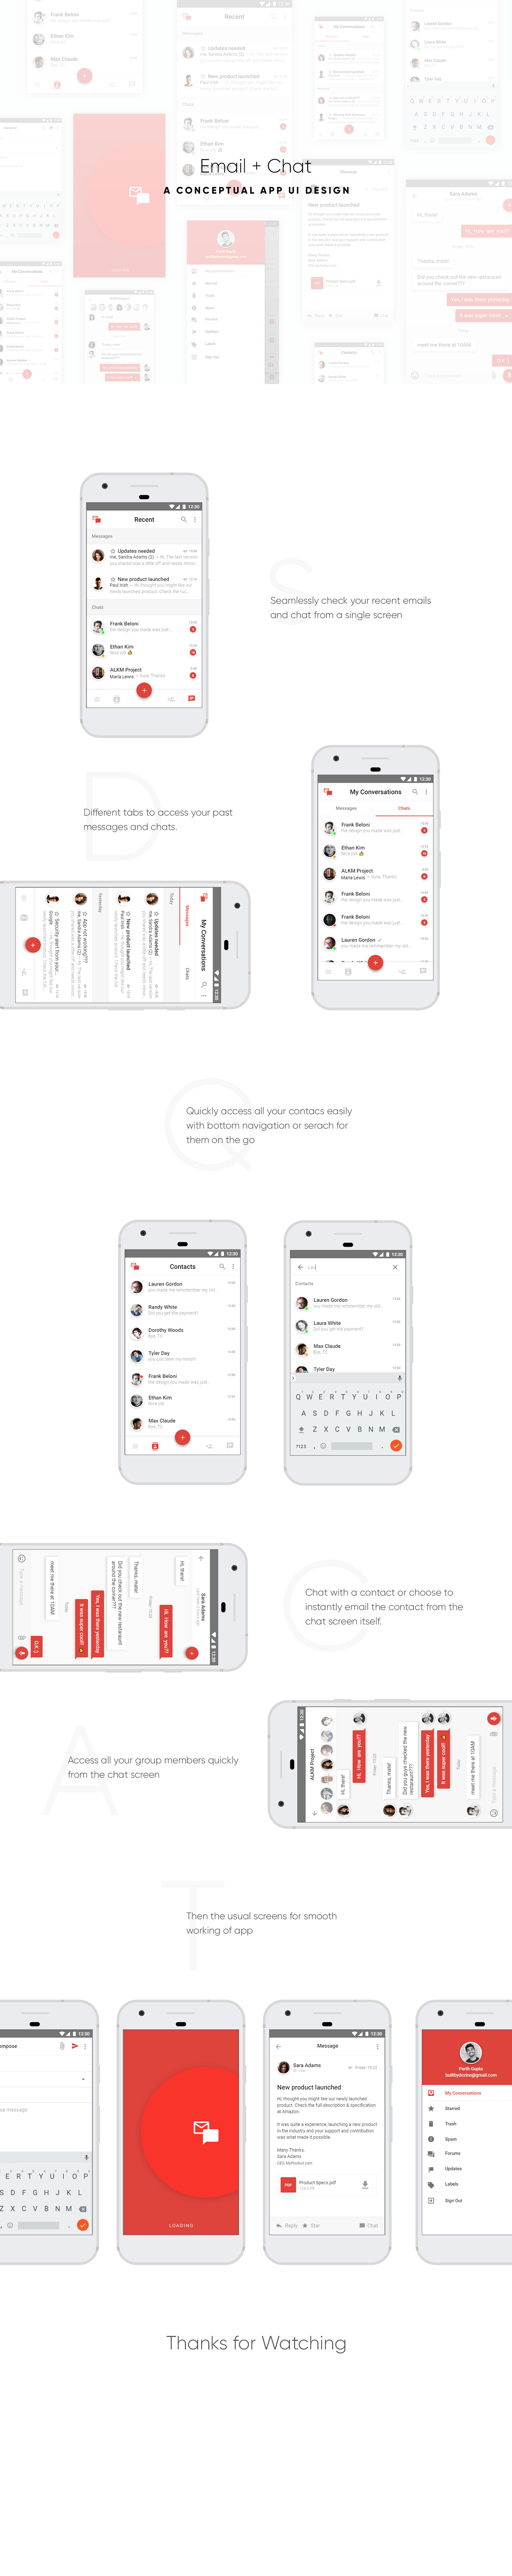 Chat-style interface client email Here's Google's